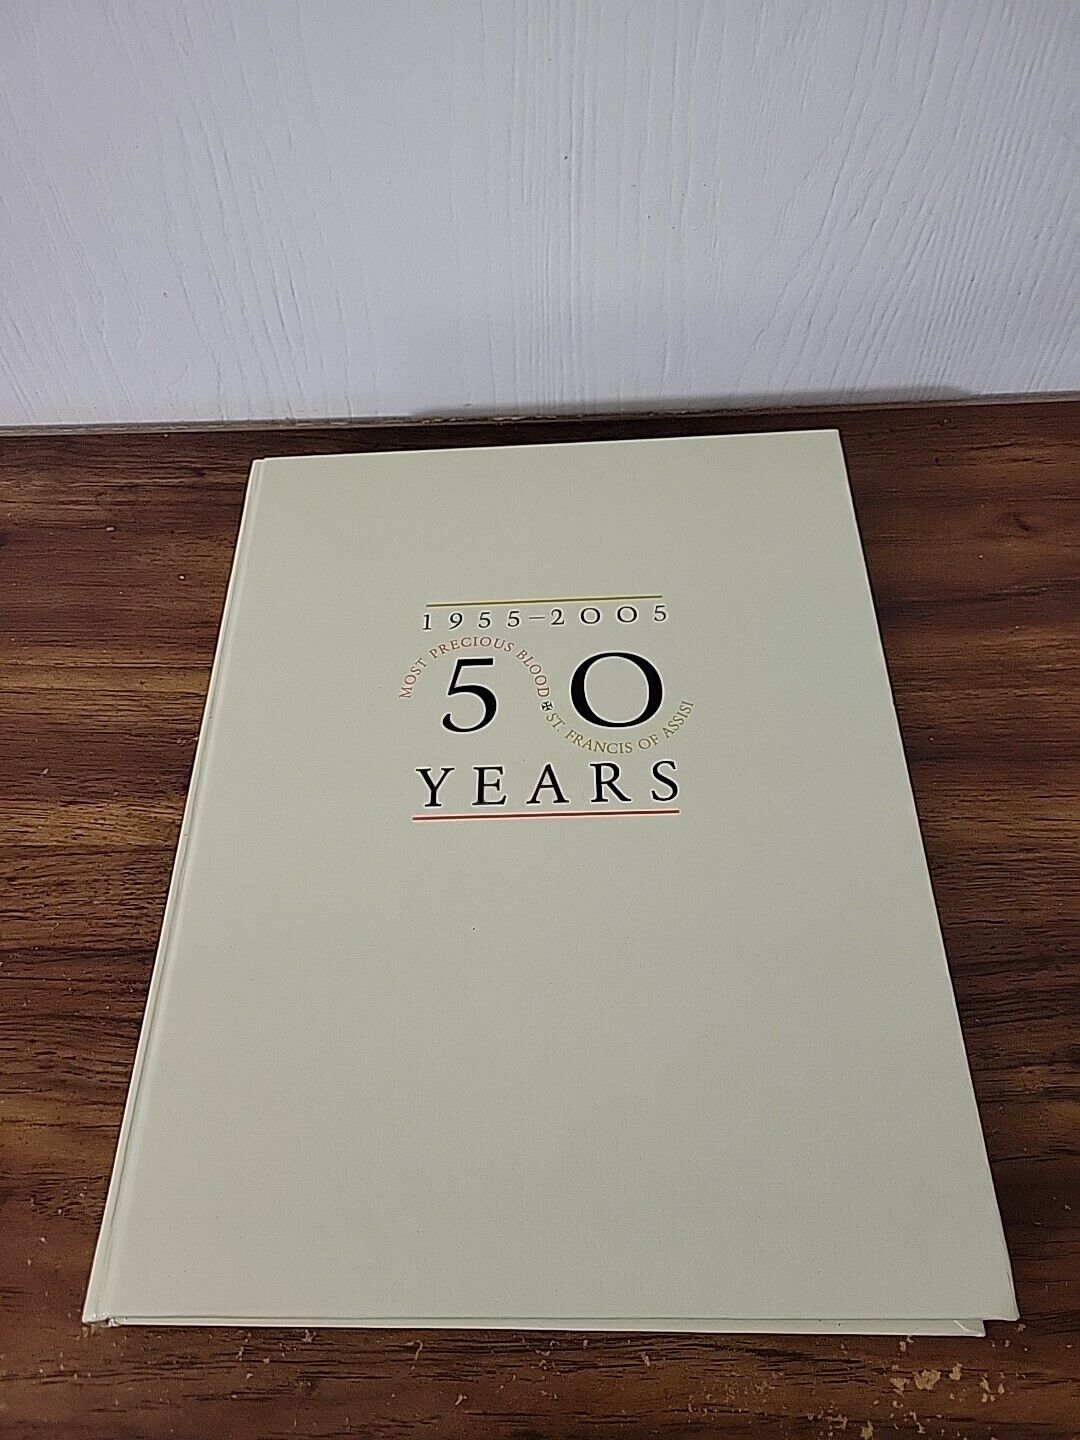 50th anniversary 1955 2005 St. Francis Of Assisi Concord California Book